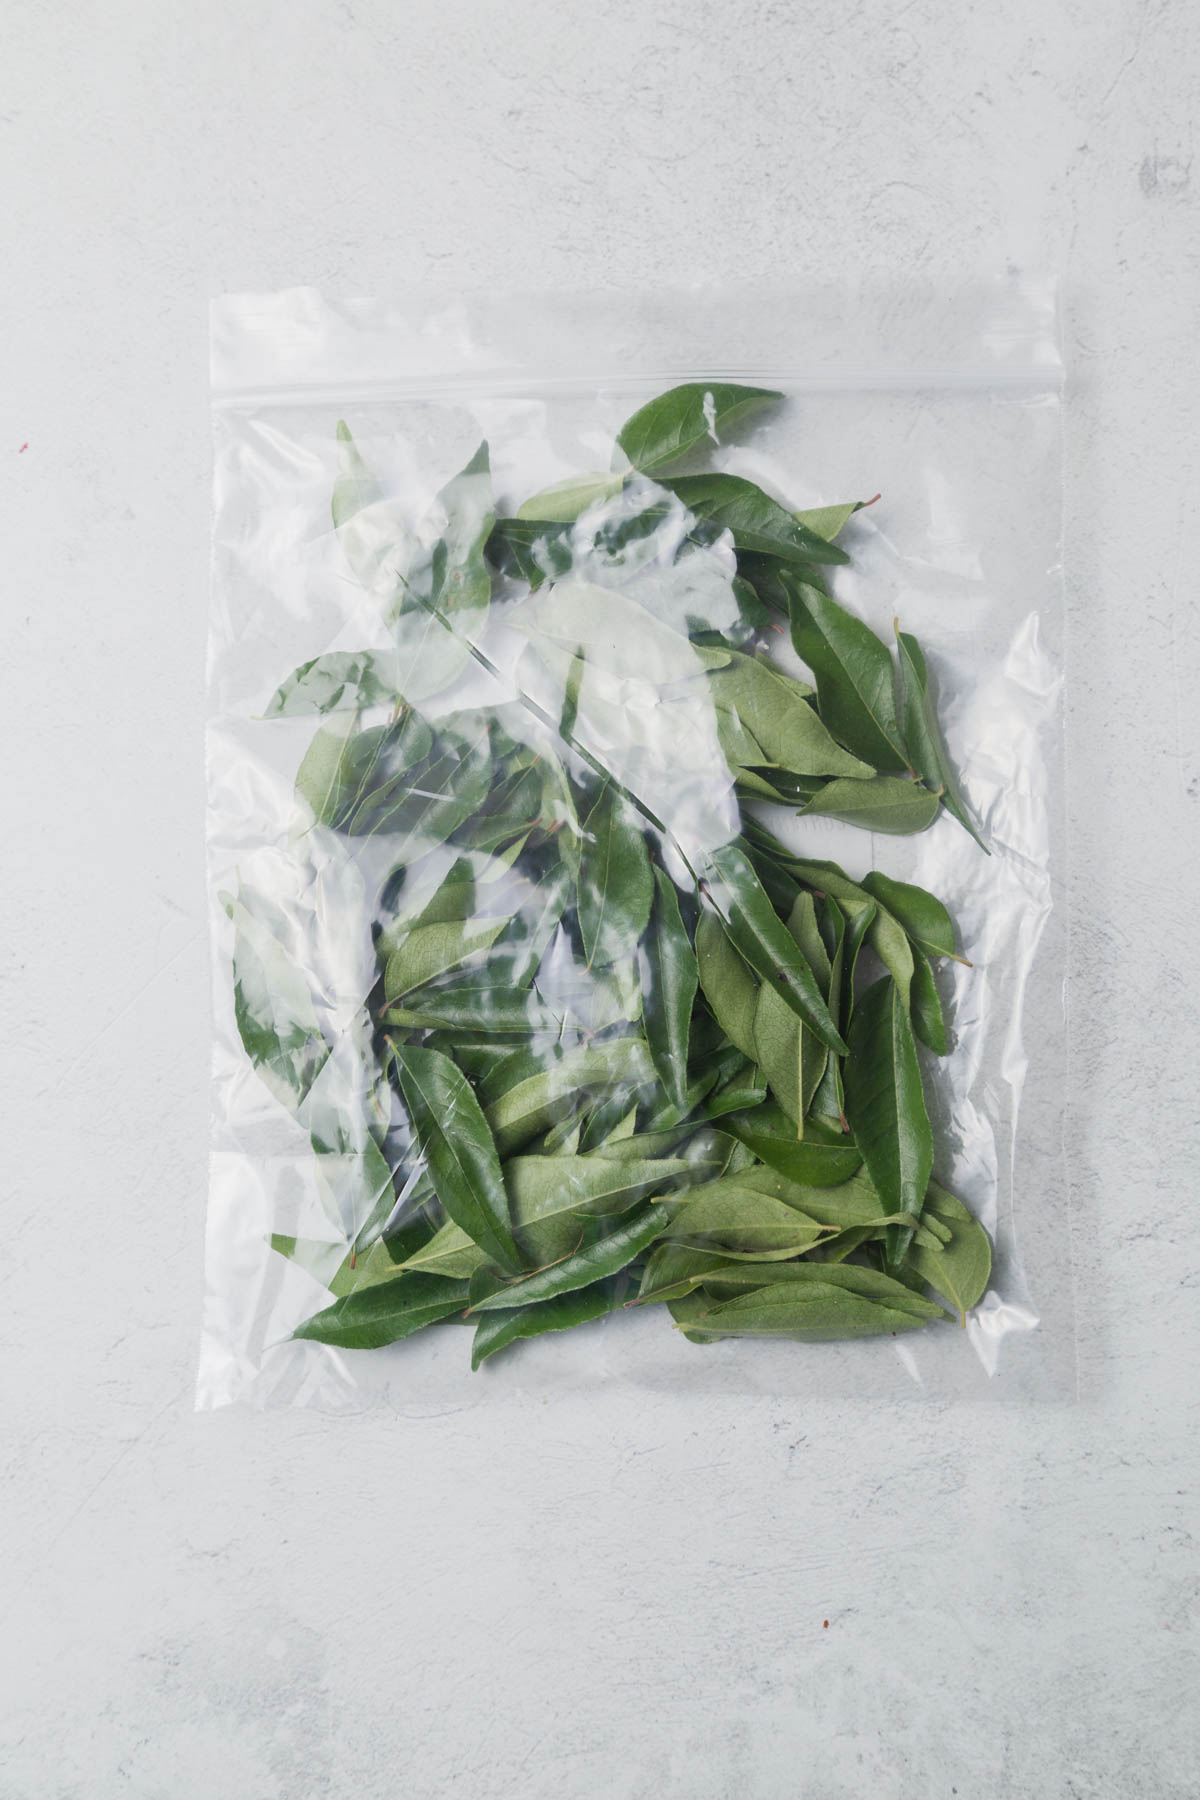 curry leaves store in a plastic bag for freezing.